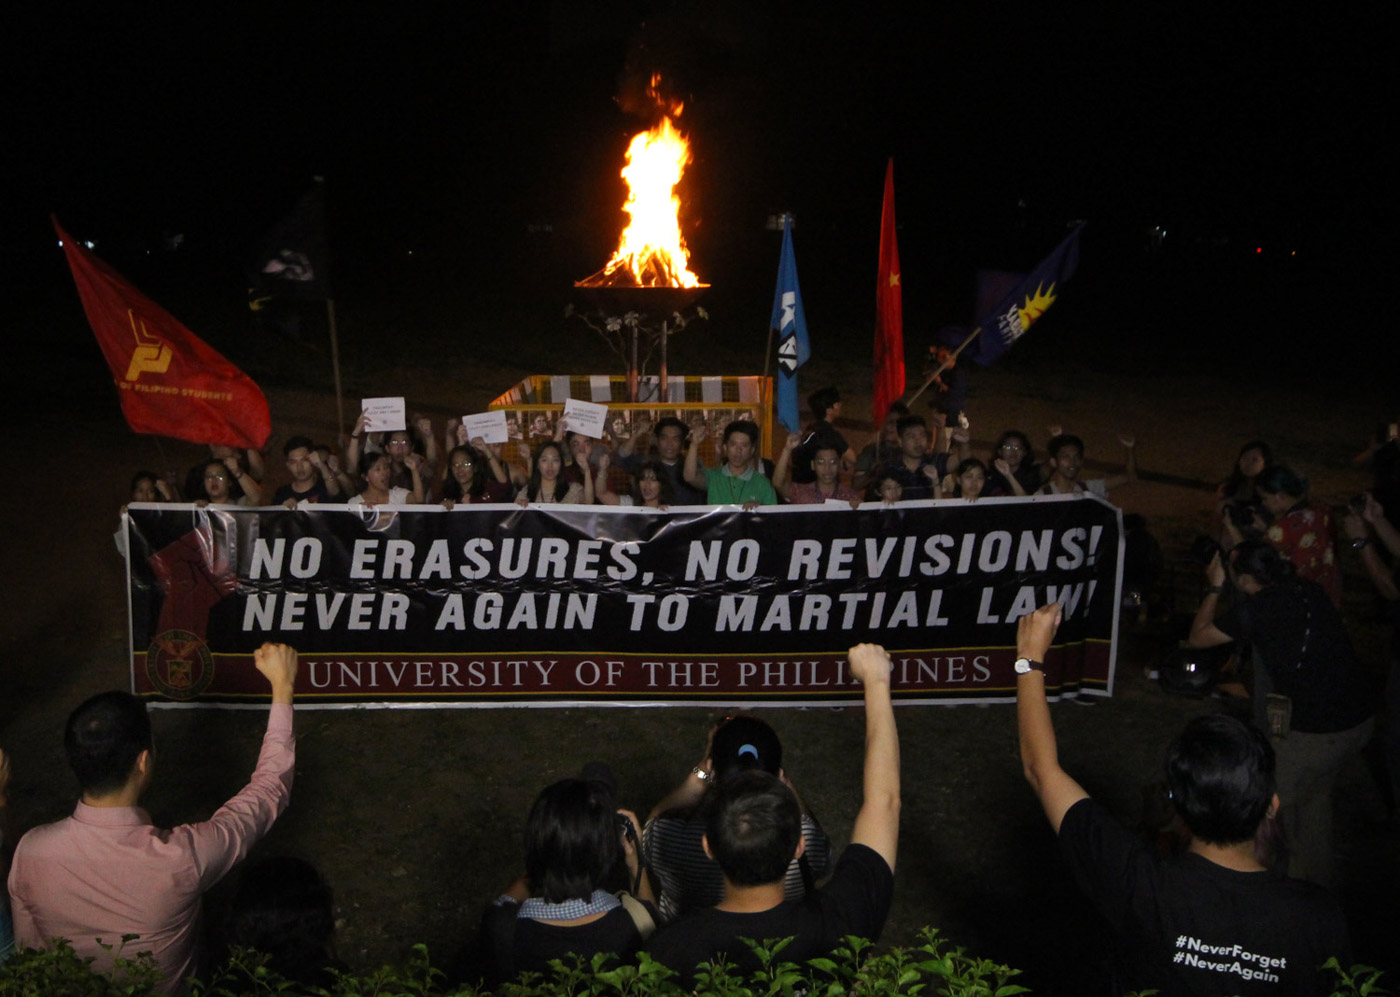 CELEBRATION. Teachers and youth groups of the University of the Philippines hold a bonfire at the UP Diliman Sunken Garden on November 9 to celebrate after the Sandiganbayan found Ilocos Norte 2nd District Representative Imelda Marcos guilty of 7 counts of graft. Photo by Darren Langit/Rappler   